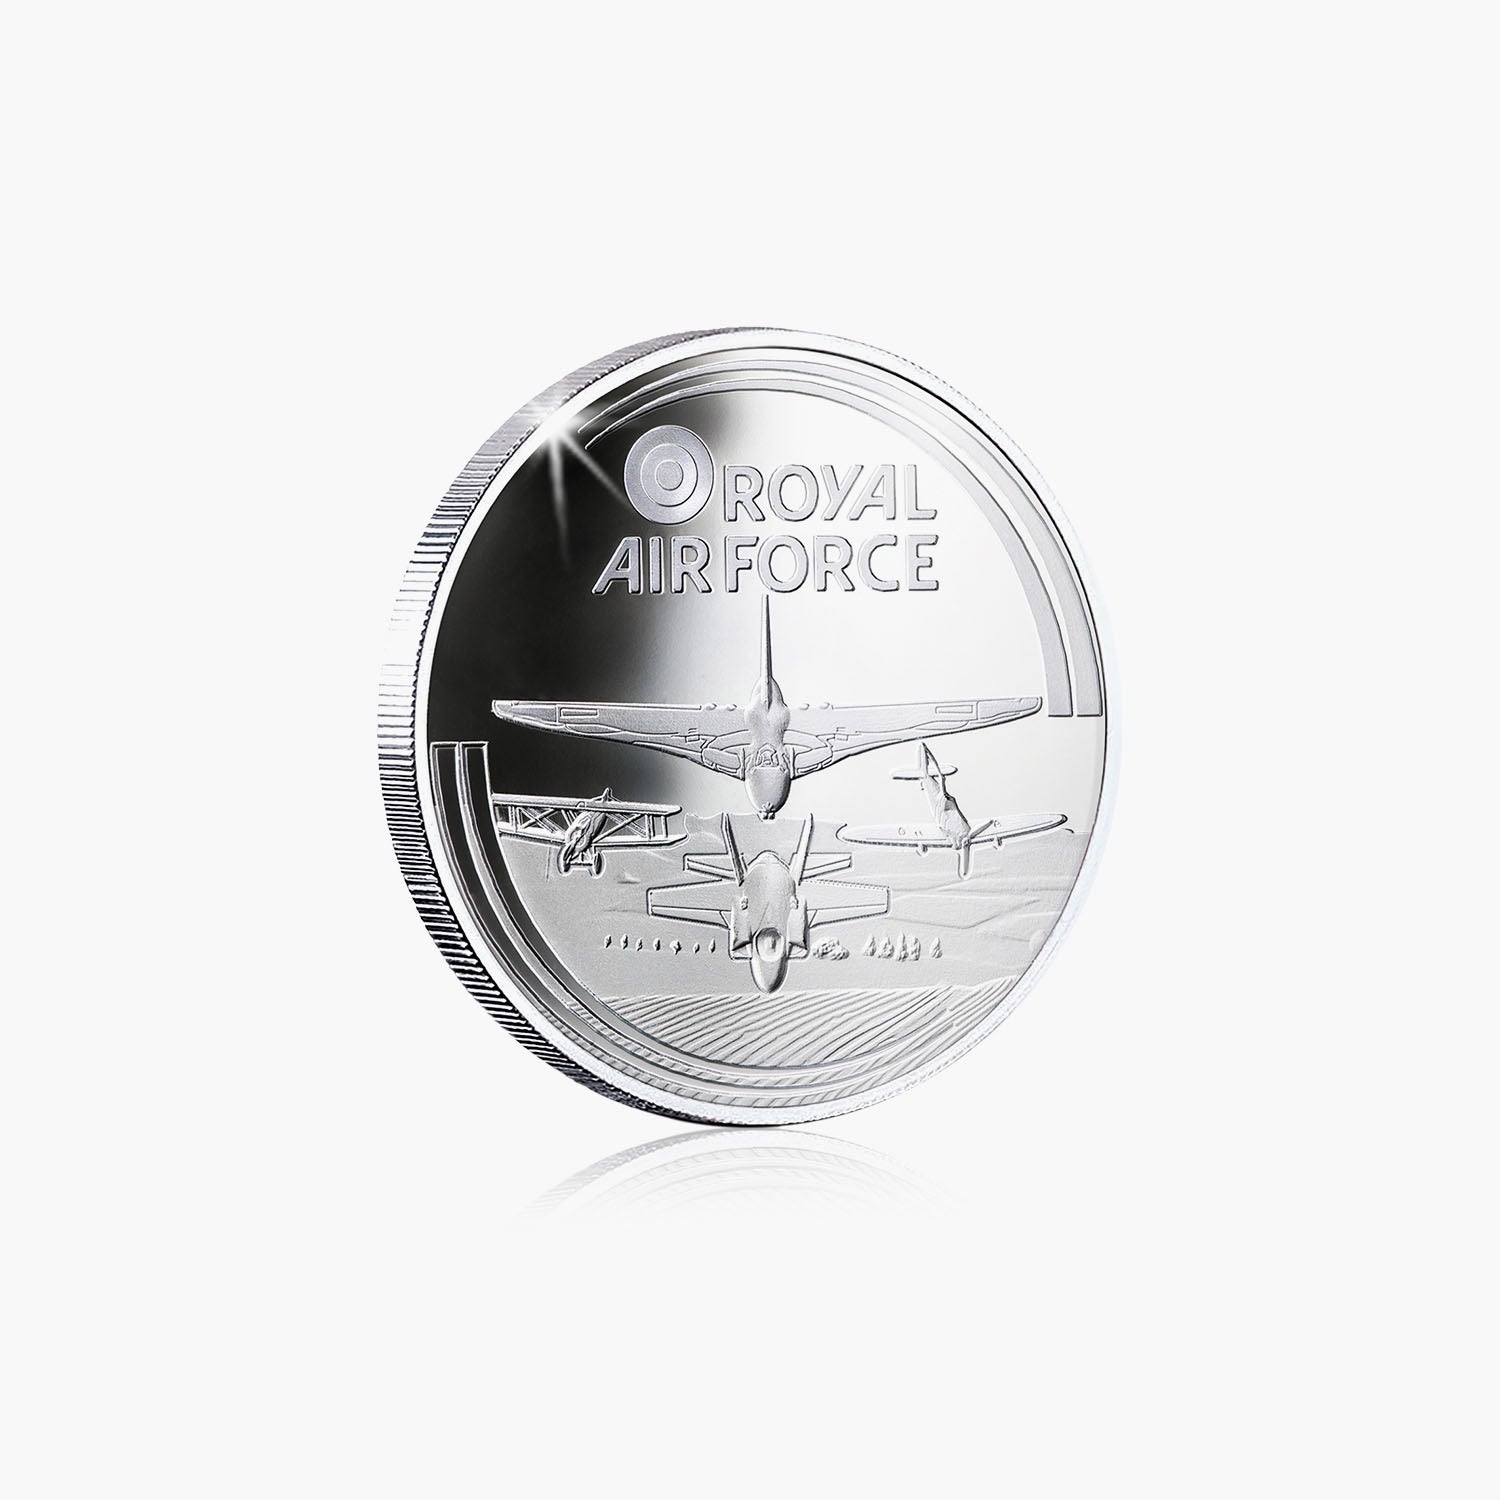 Extreme Velocity Silver-Plated Commemorative